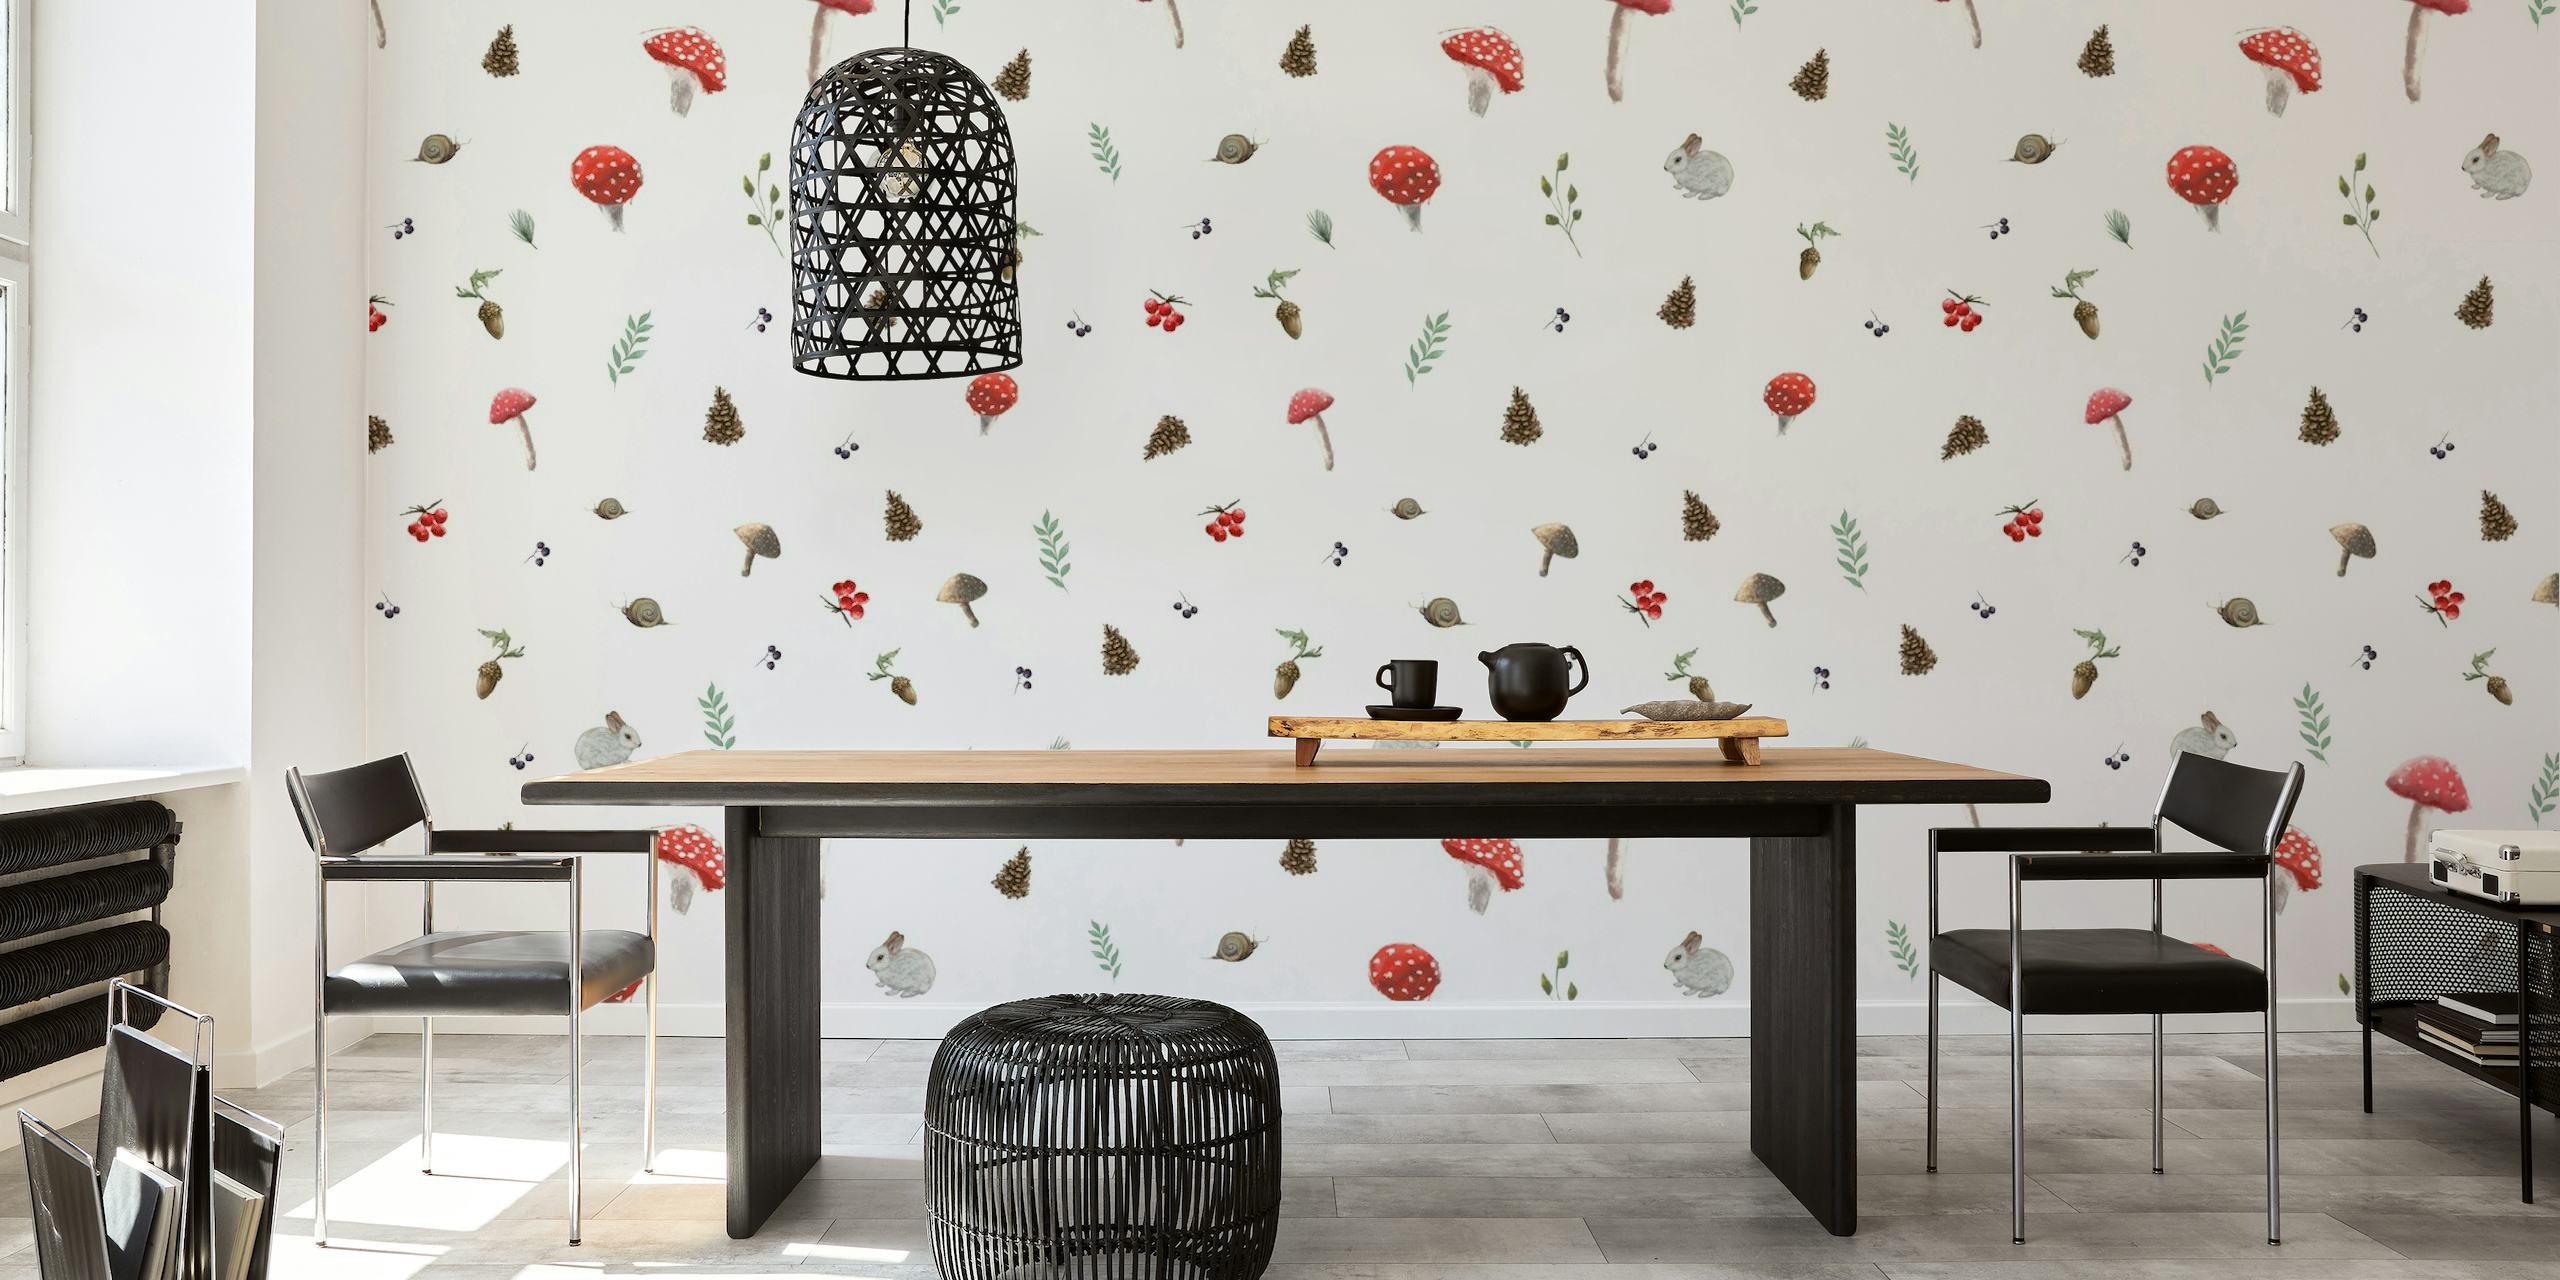 Autumn-inspired wall mural with a soft pattern of mushrooms in warm, earthy tones on a light background.